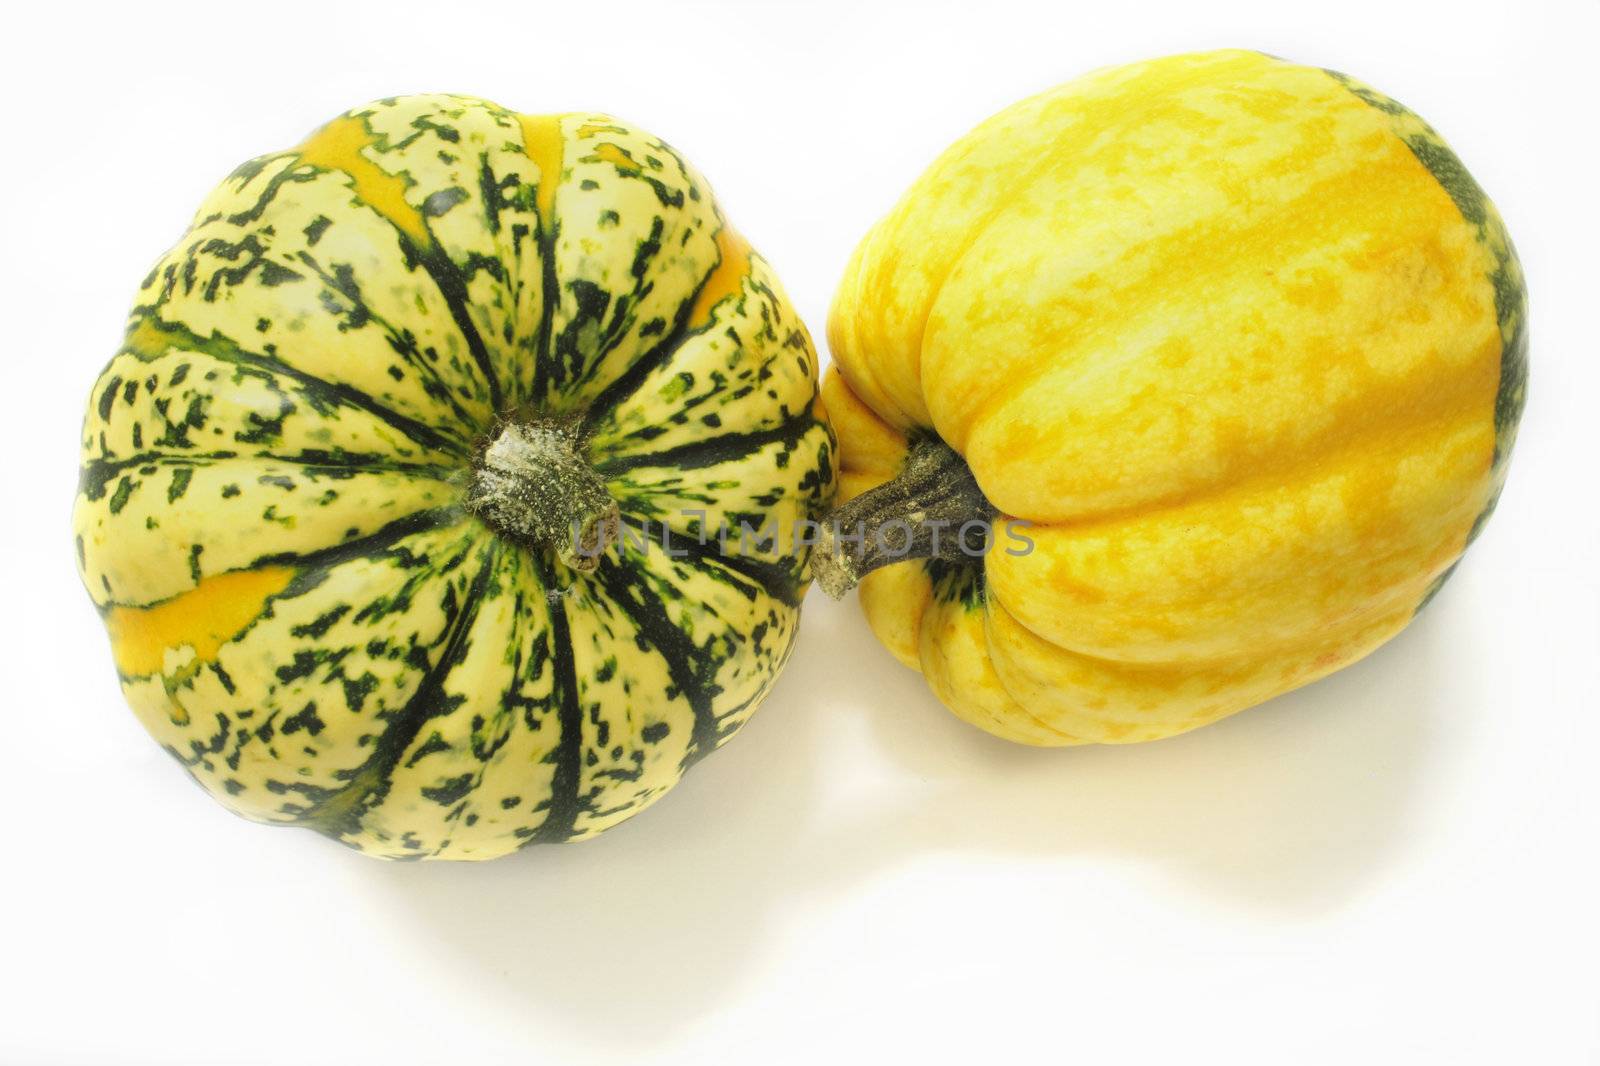 green and yellow ornamental squashes by leafy